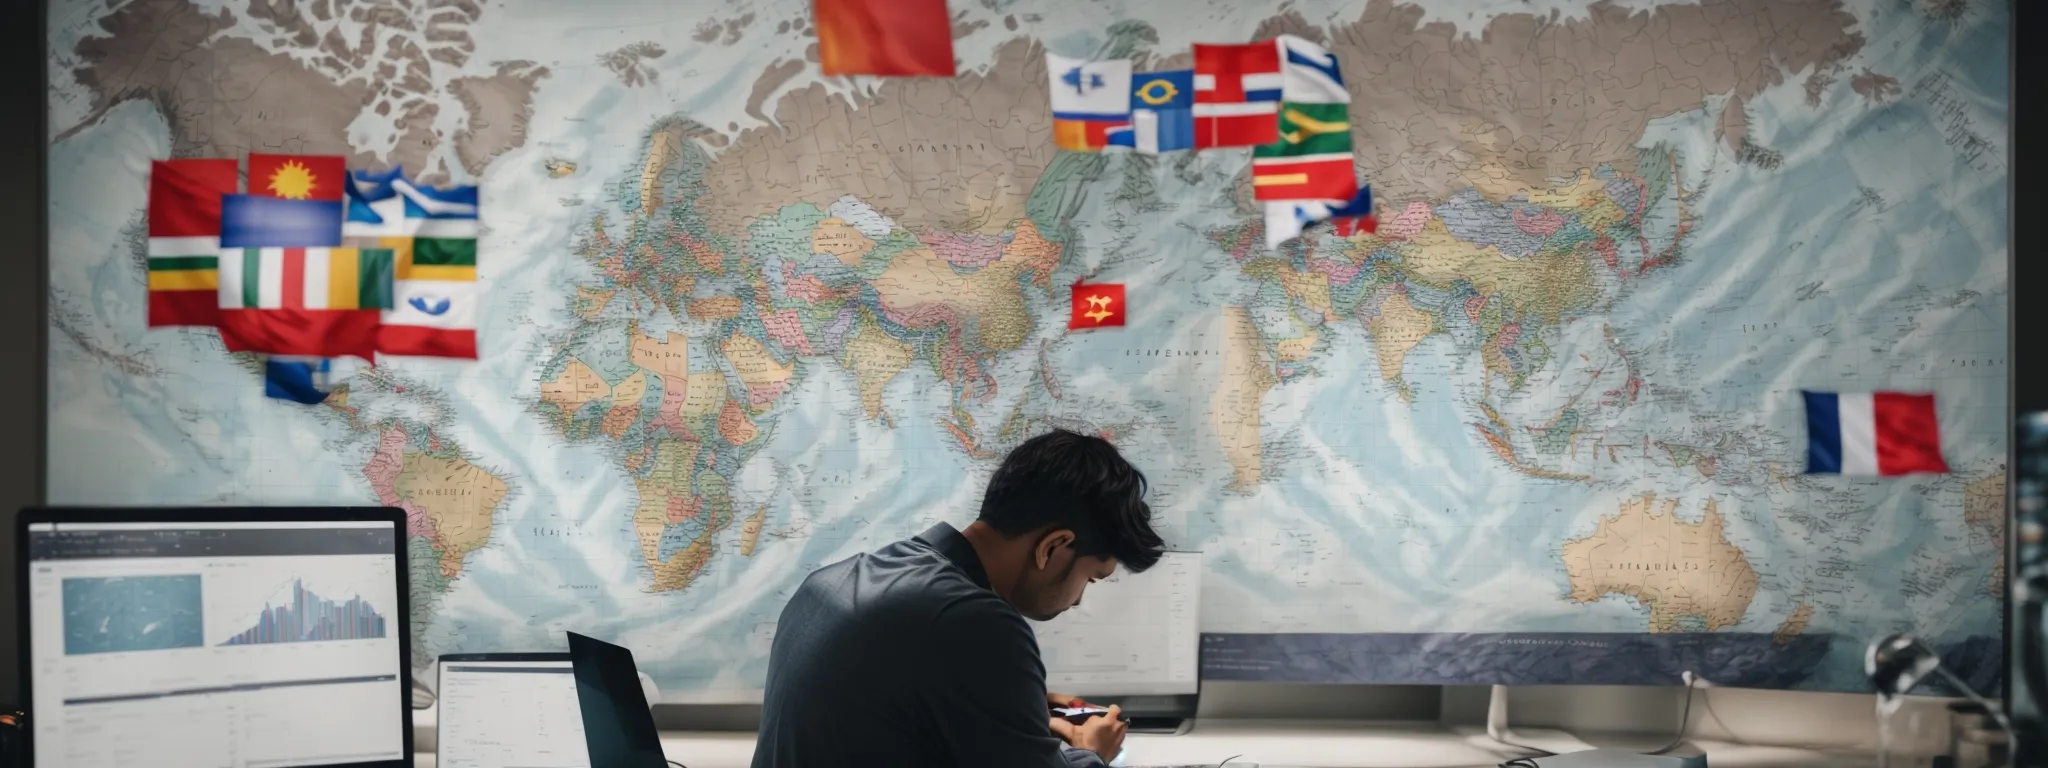 a digital marketer studies a world map dotted with various flags while adjusting settings on a global analytics dashboard.